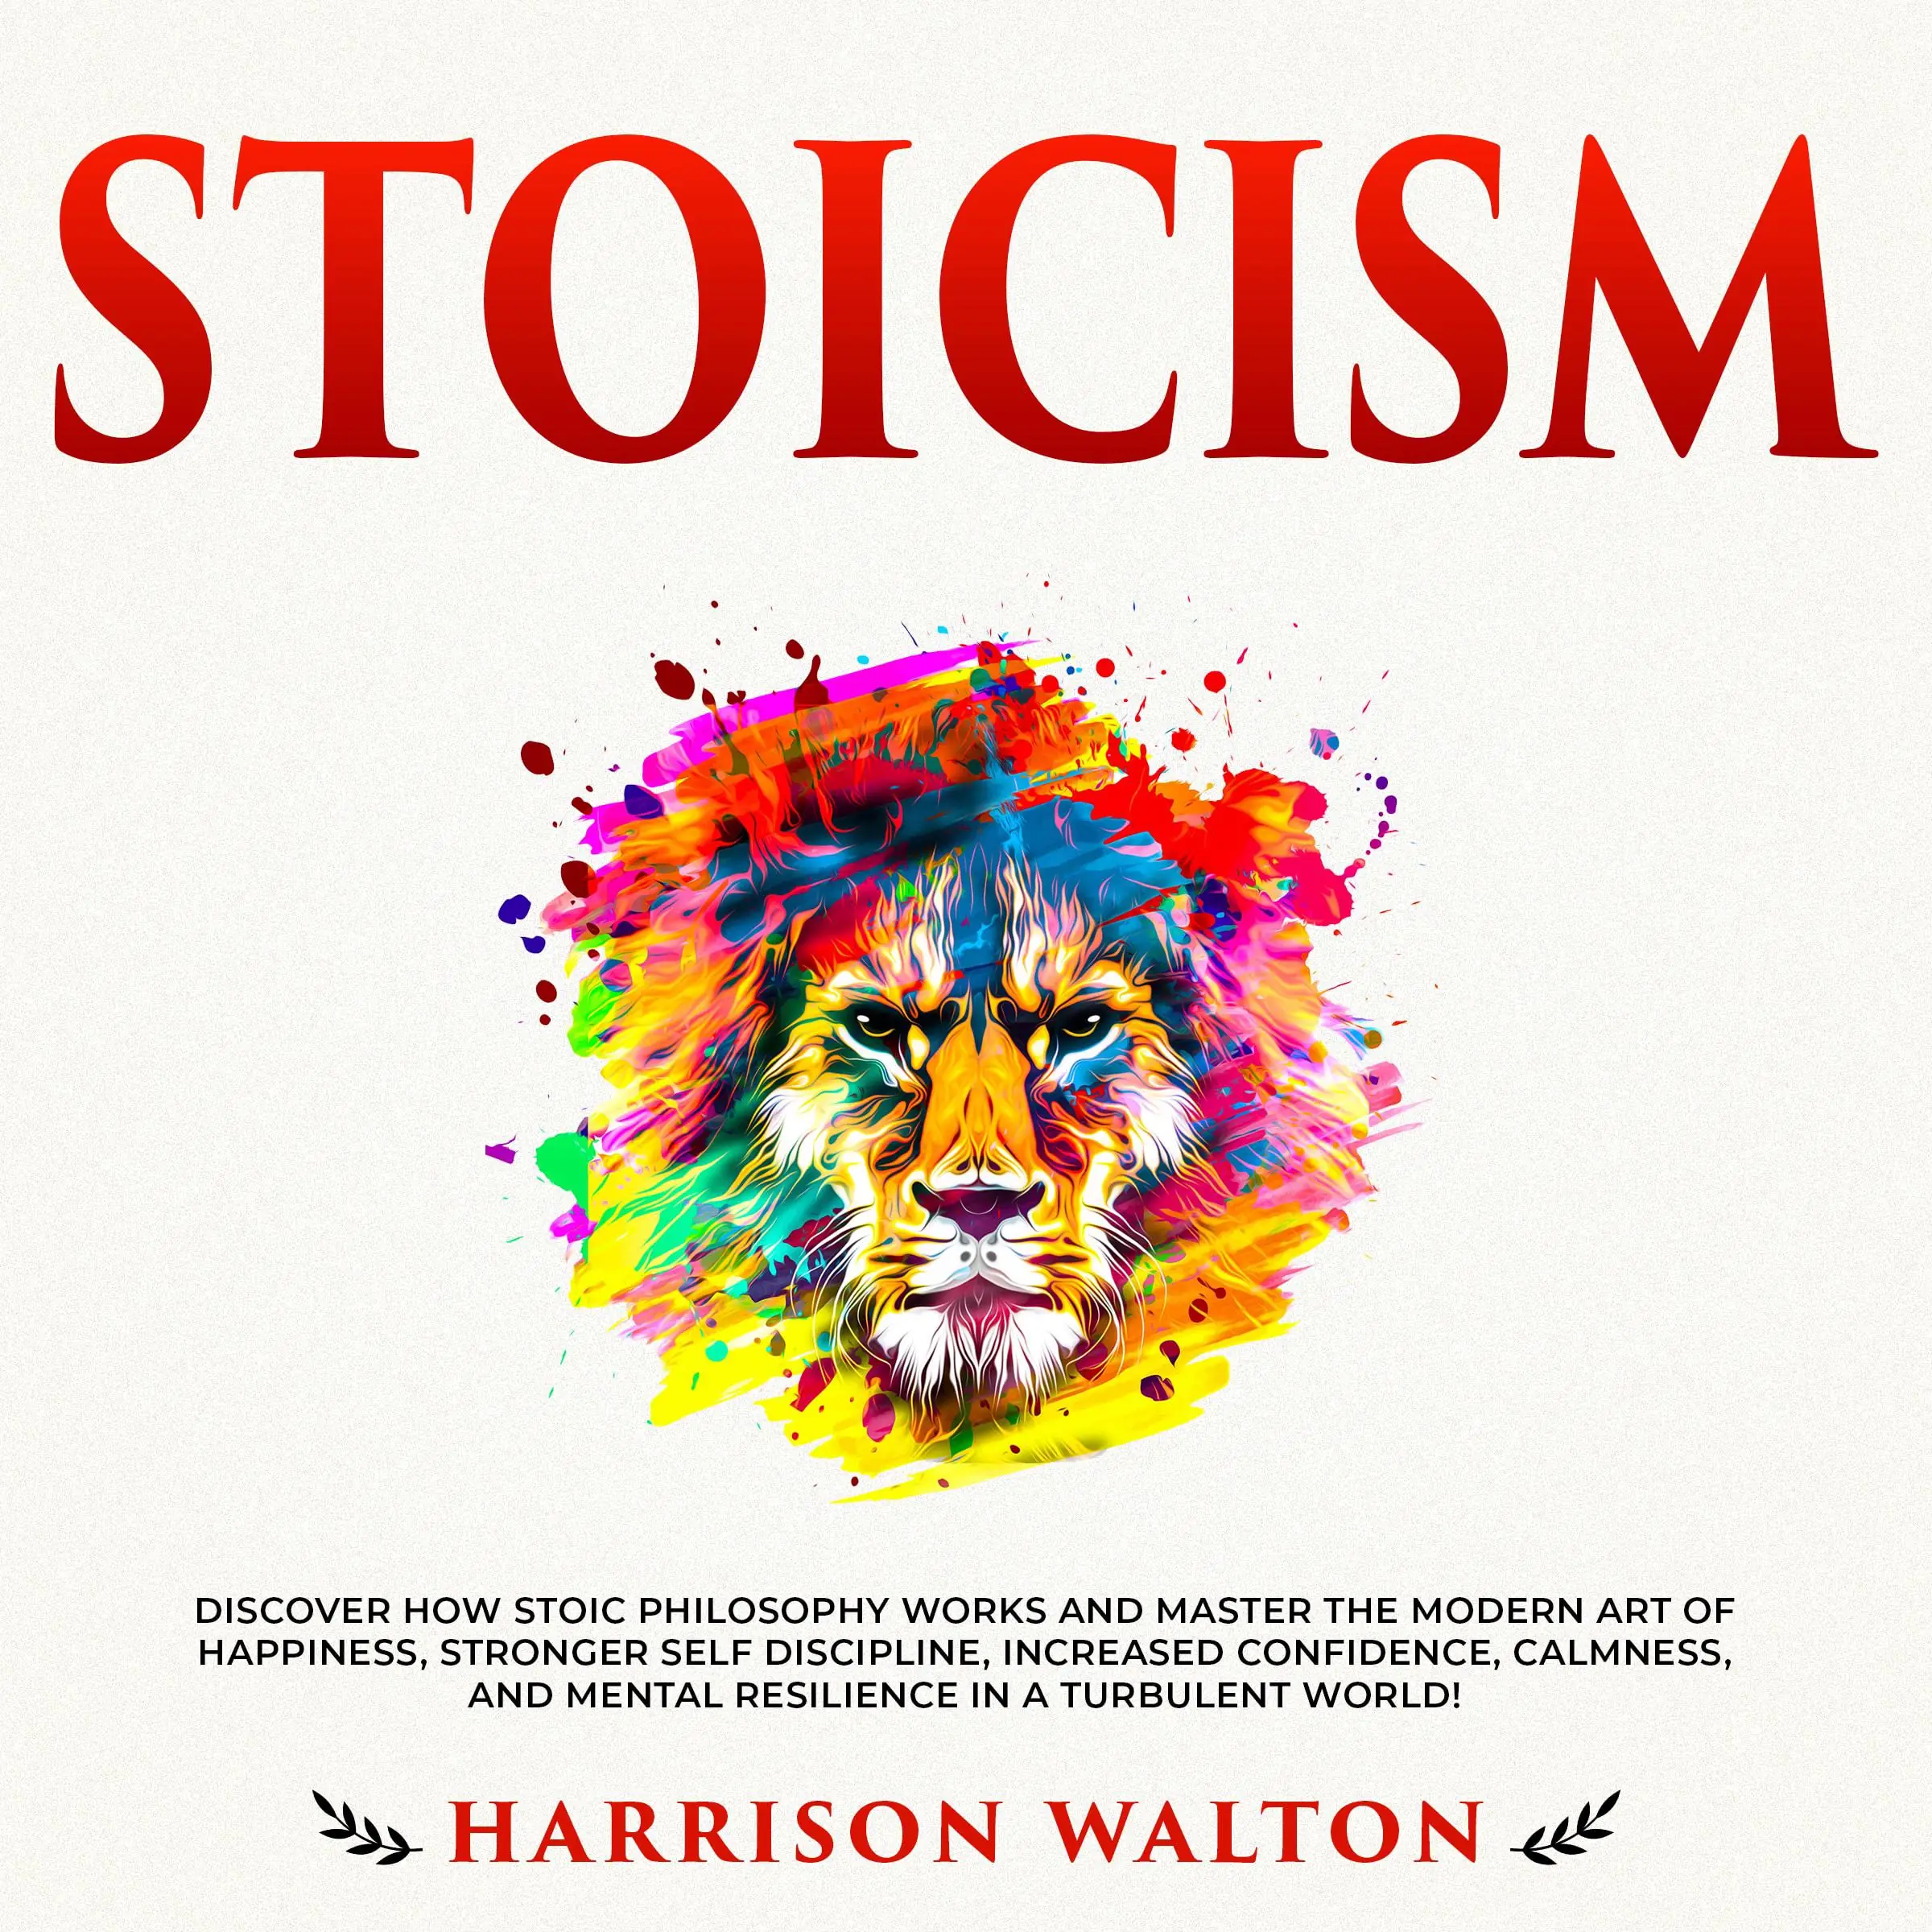 Stoicism: Discover How Stoic Philosophy Works and Master the Modern Art of Happiness, Stronger Self Discipline, Increased Confidence, Calmness, and Mental Resilience in a Turbulent World! Audiobook by Harrison Walton